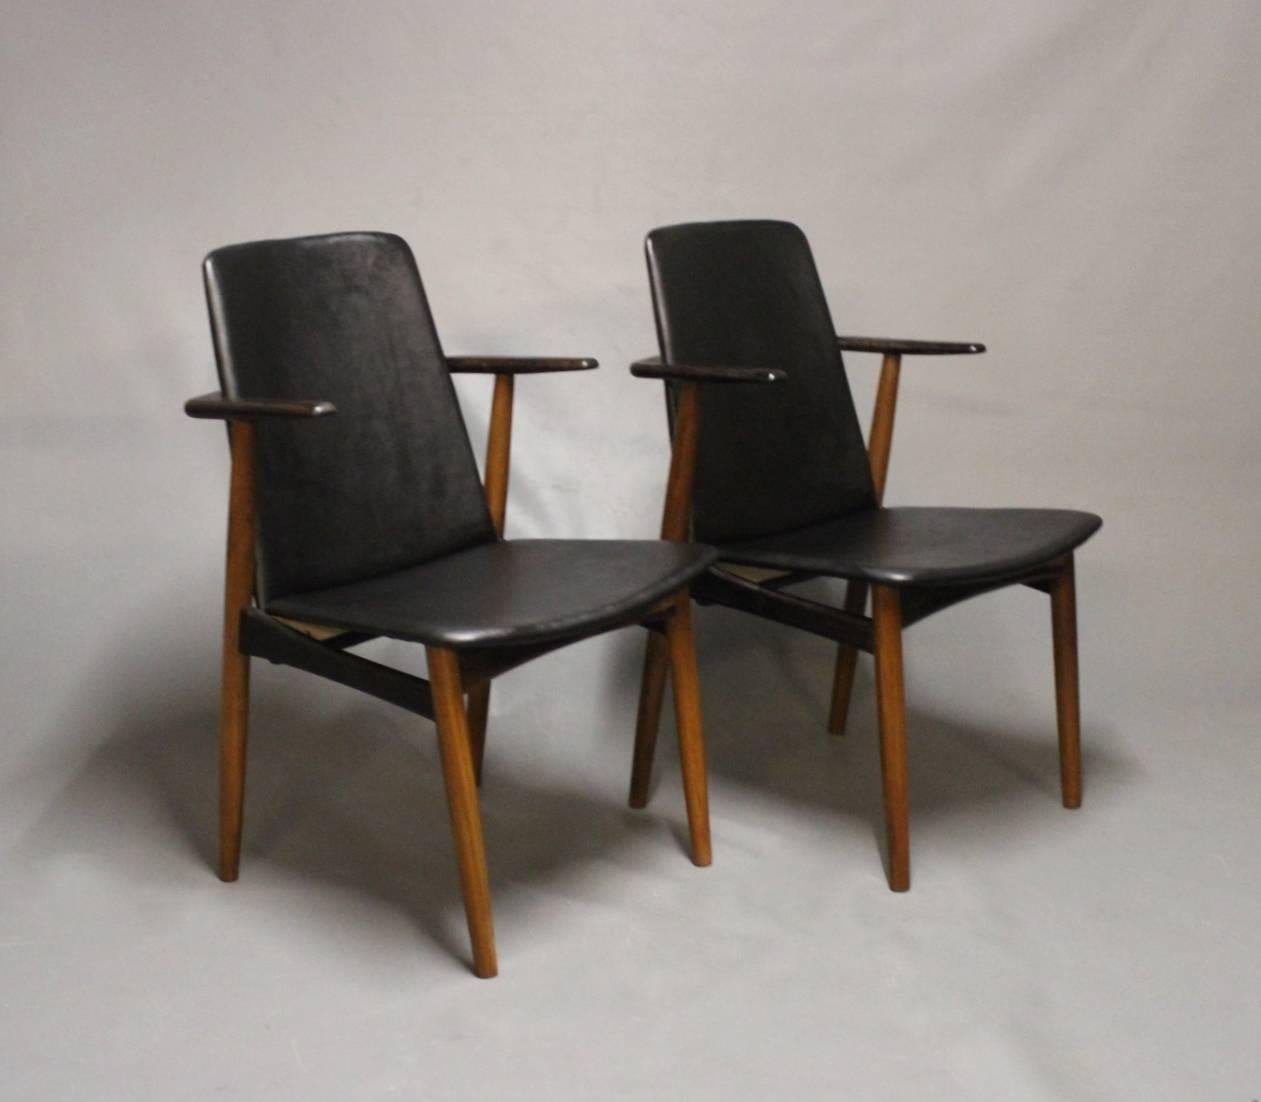 A pair of armchairs in Classic black leather and rosewood designed by Hans Olsen and from the 1960s. The chairs are in great vintage condition.

This product will be inspected thoroughly at our professional workshop by our educated employees, who